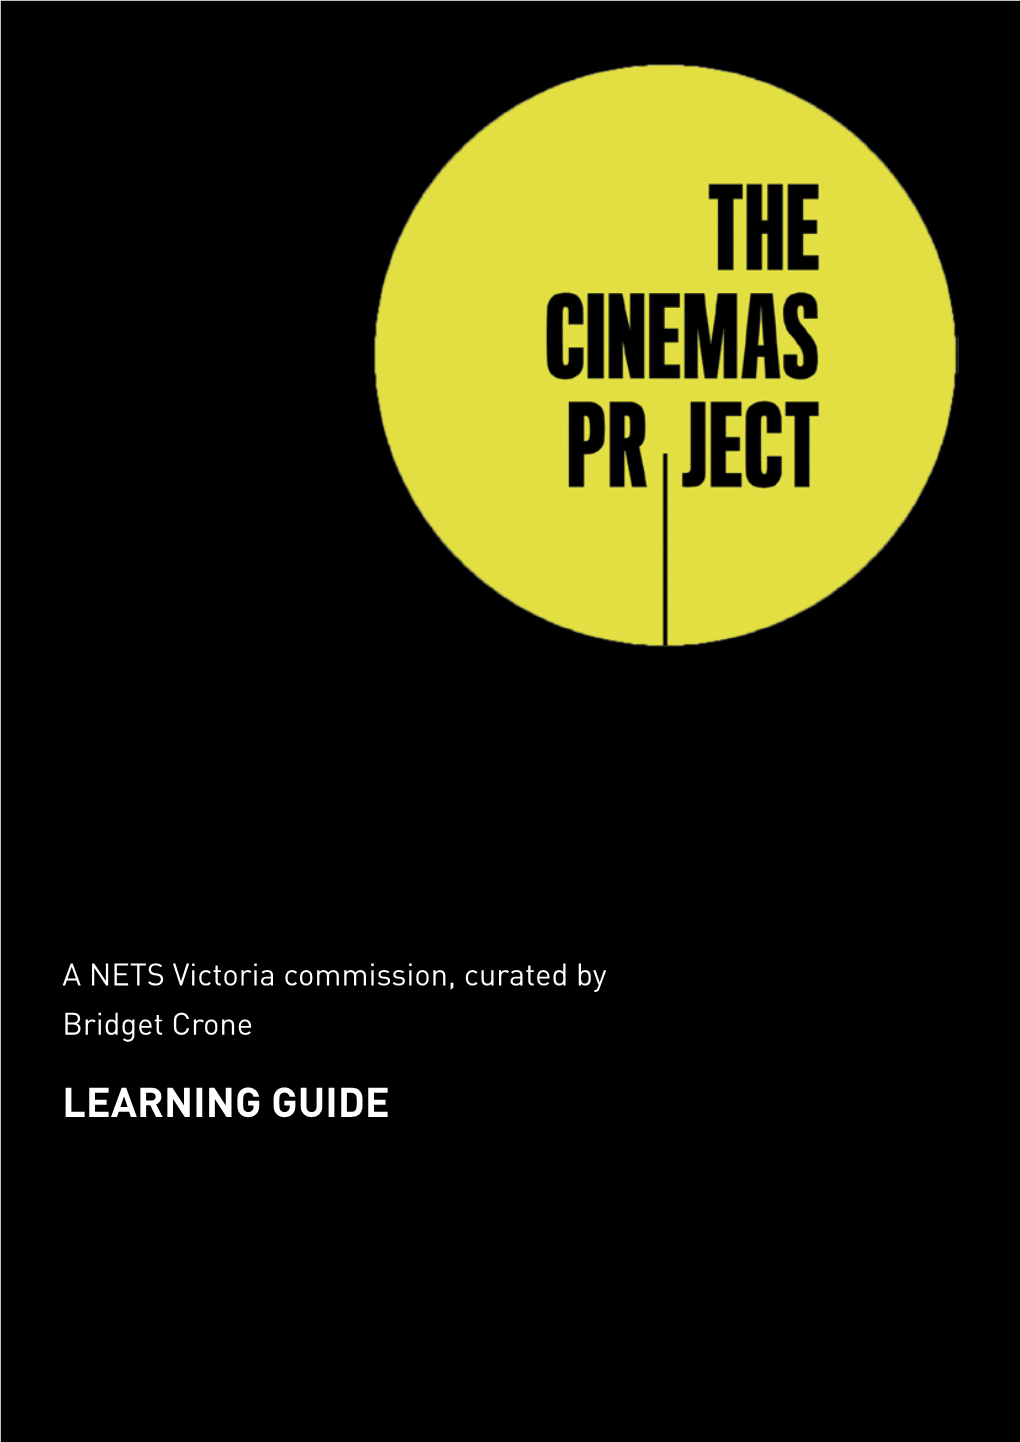 The Cinemas Project Learning Guide